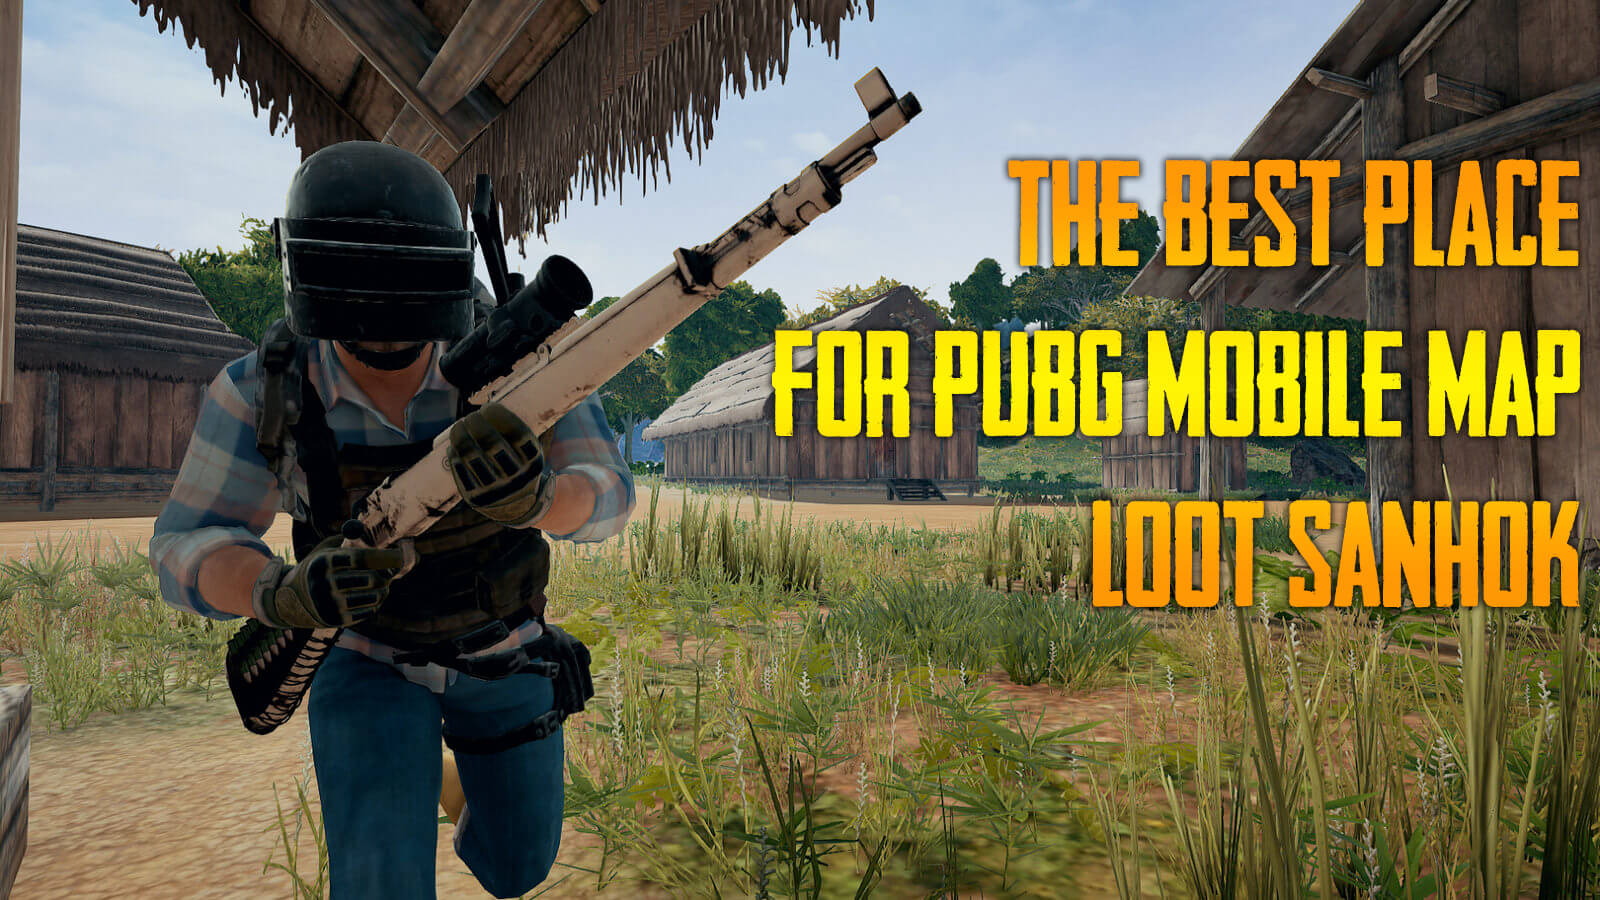 The Best Place For Pubg Mobile Map Loot Sanhok M24 Gun Flare - the best place for pubg mobile map loot sanhok m24 gun flare kar98k